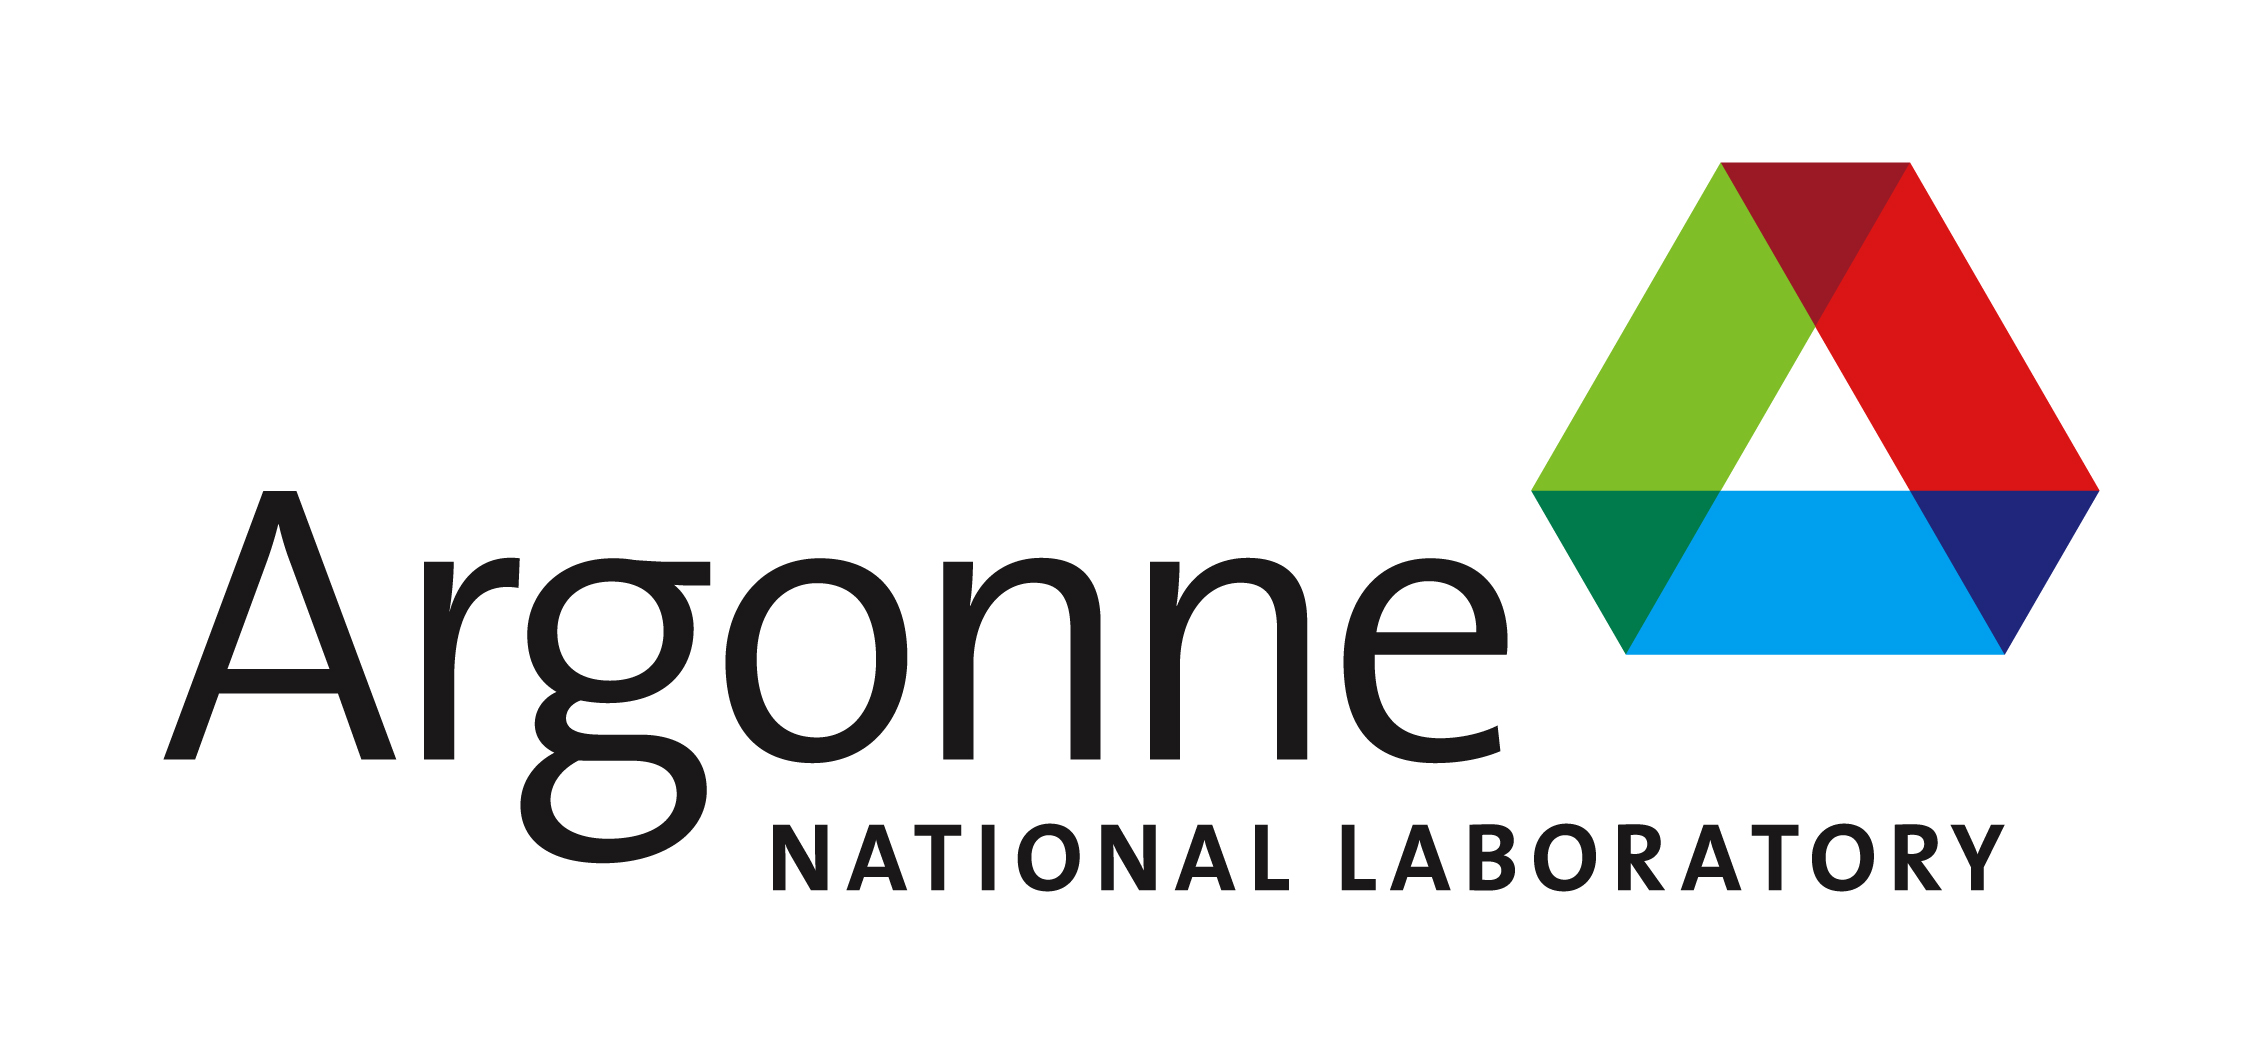 PROJECT PROFILE: Argonne National Laboratory (2015) | Department of Energy